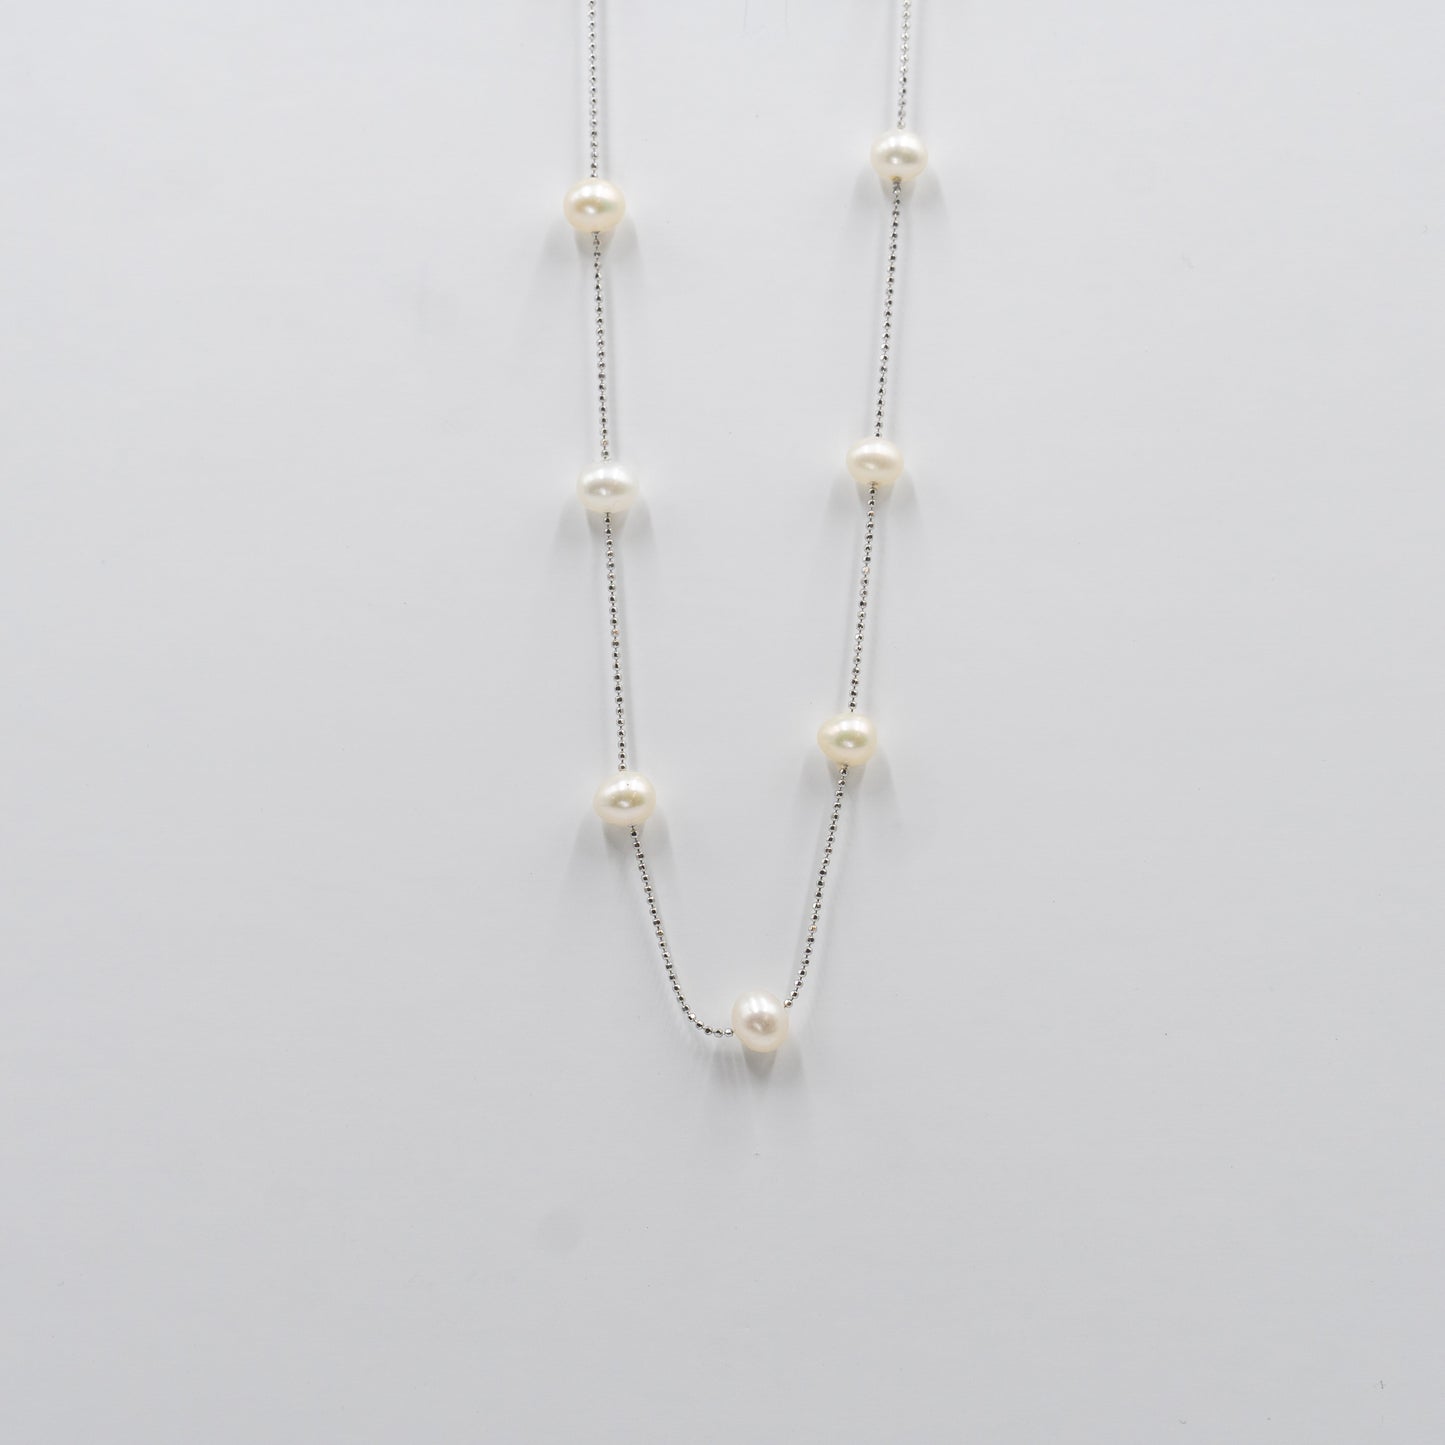 SAM fresh water long pearl necklace